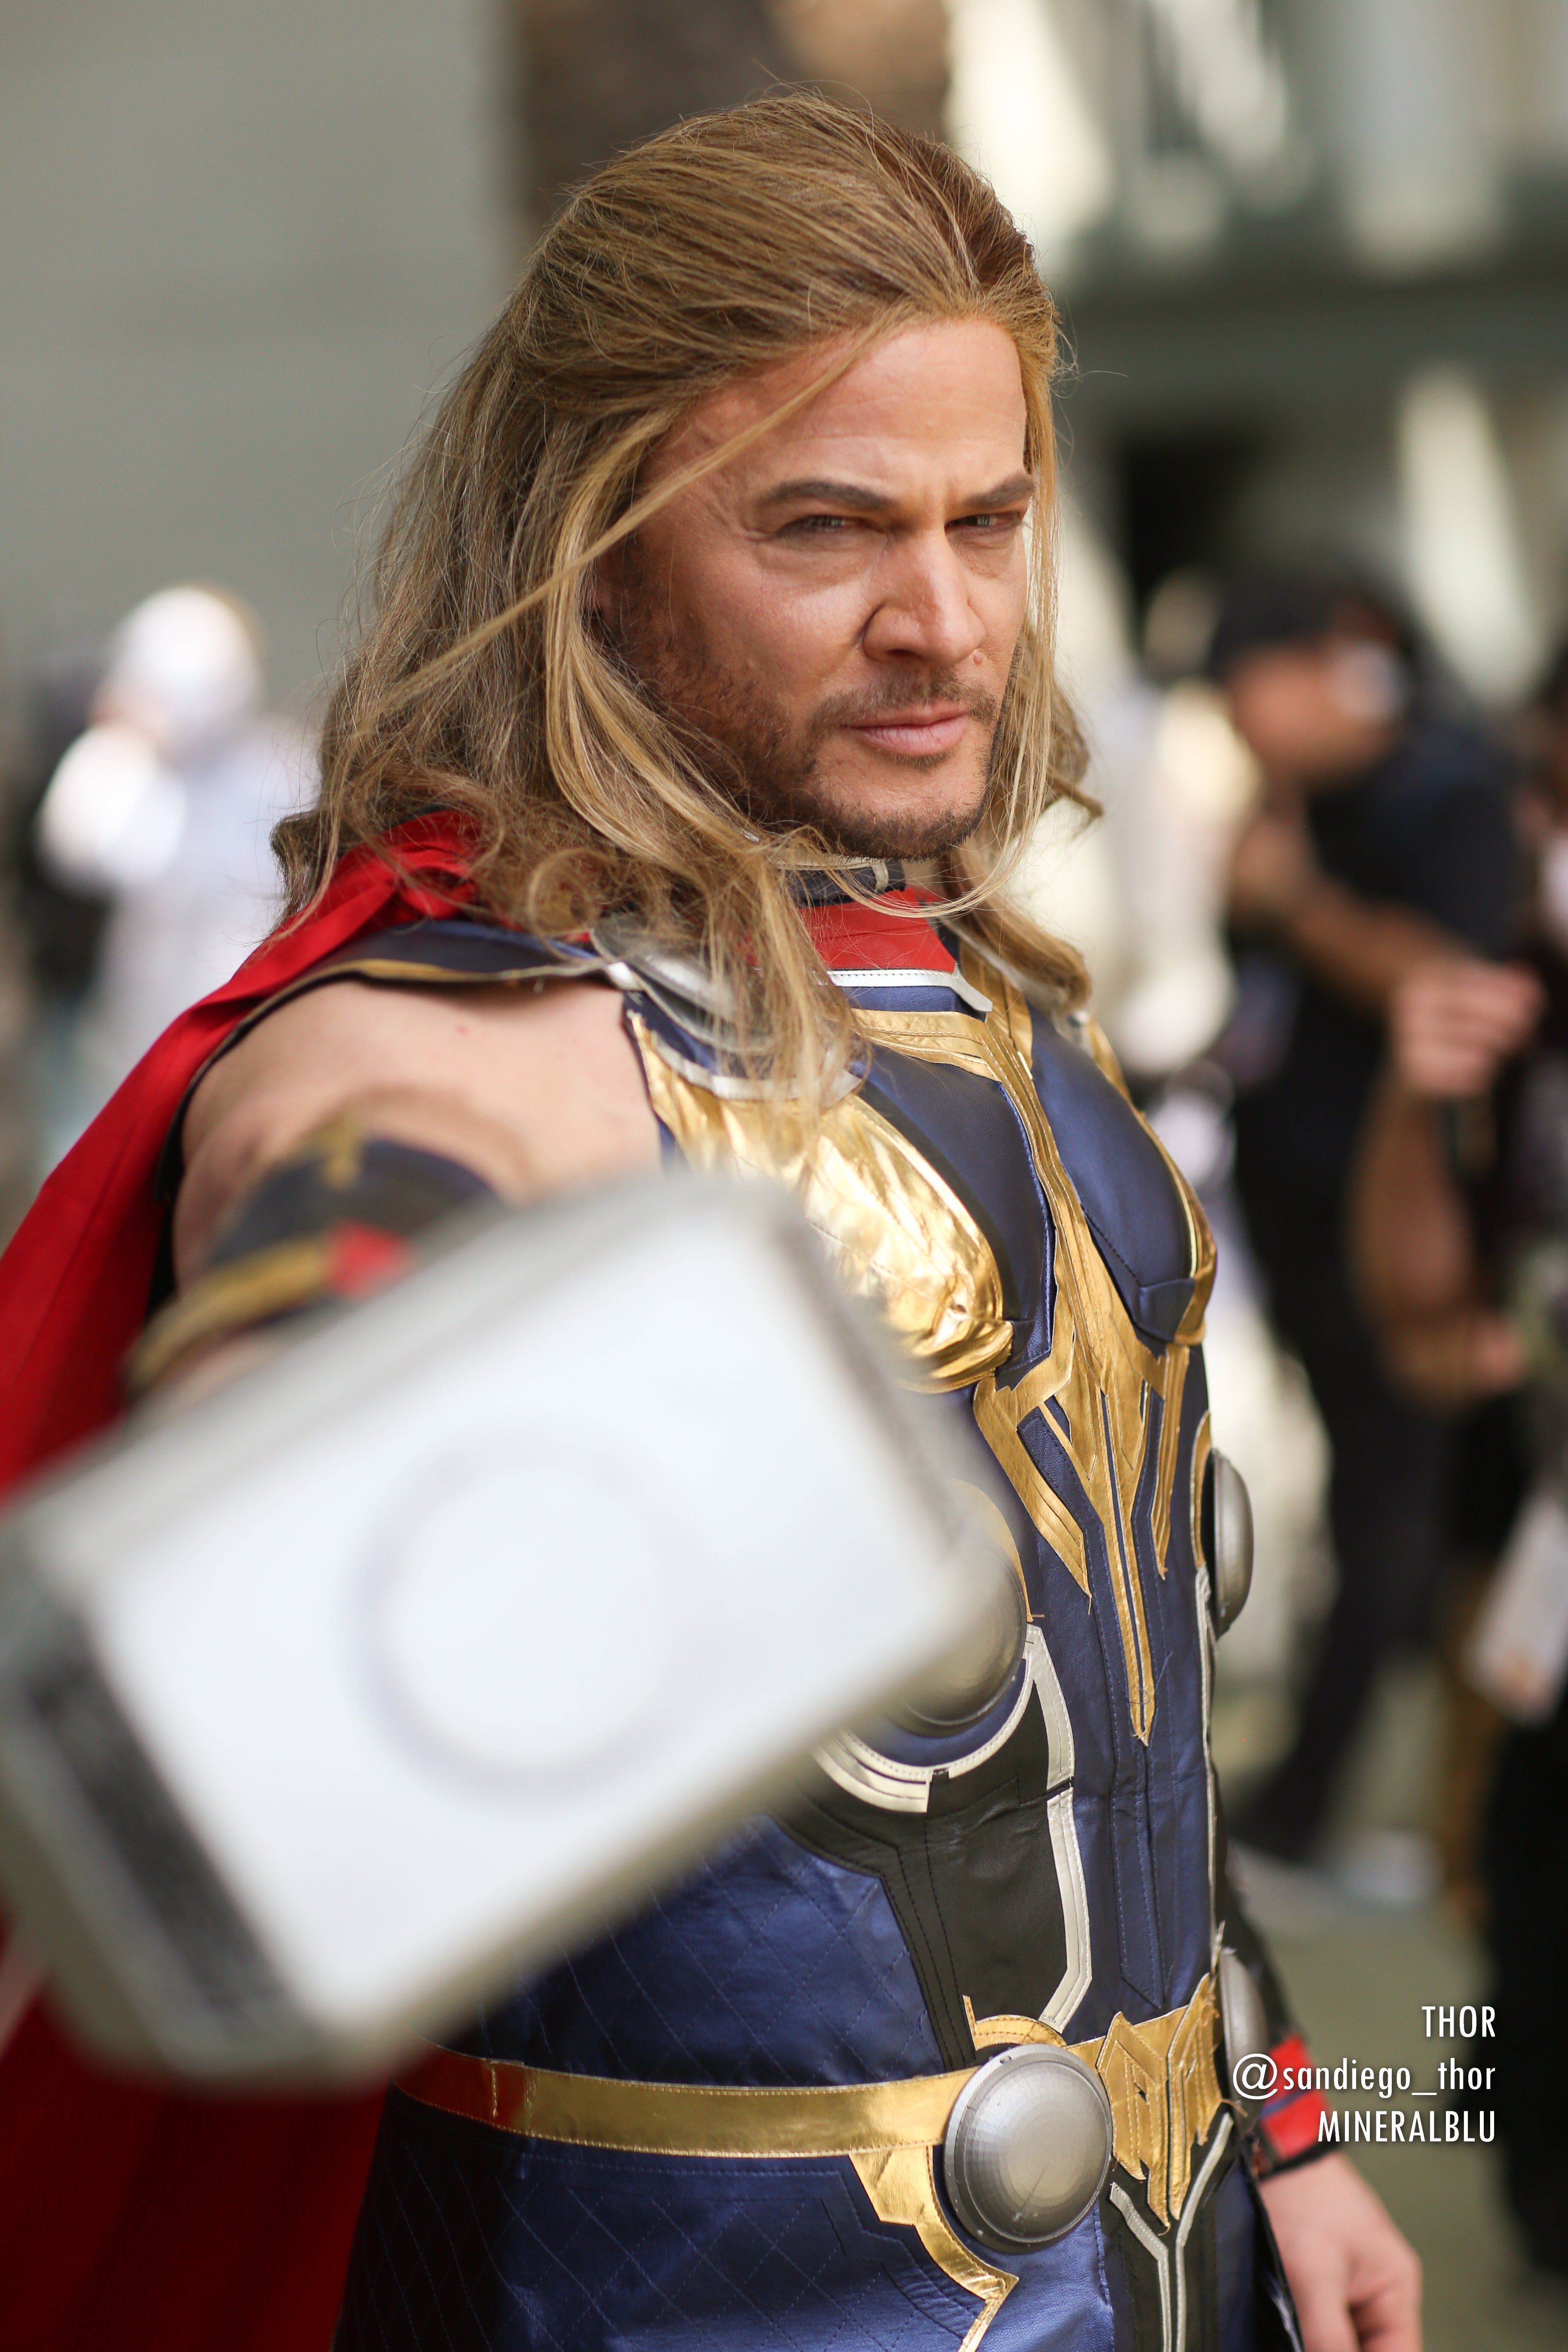 Our Favourite Cosplay From WonderCon 2023